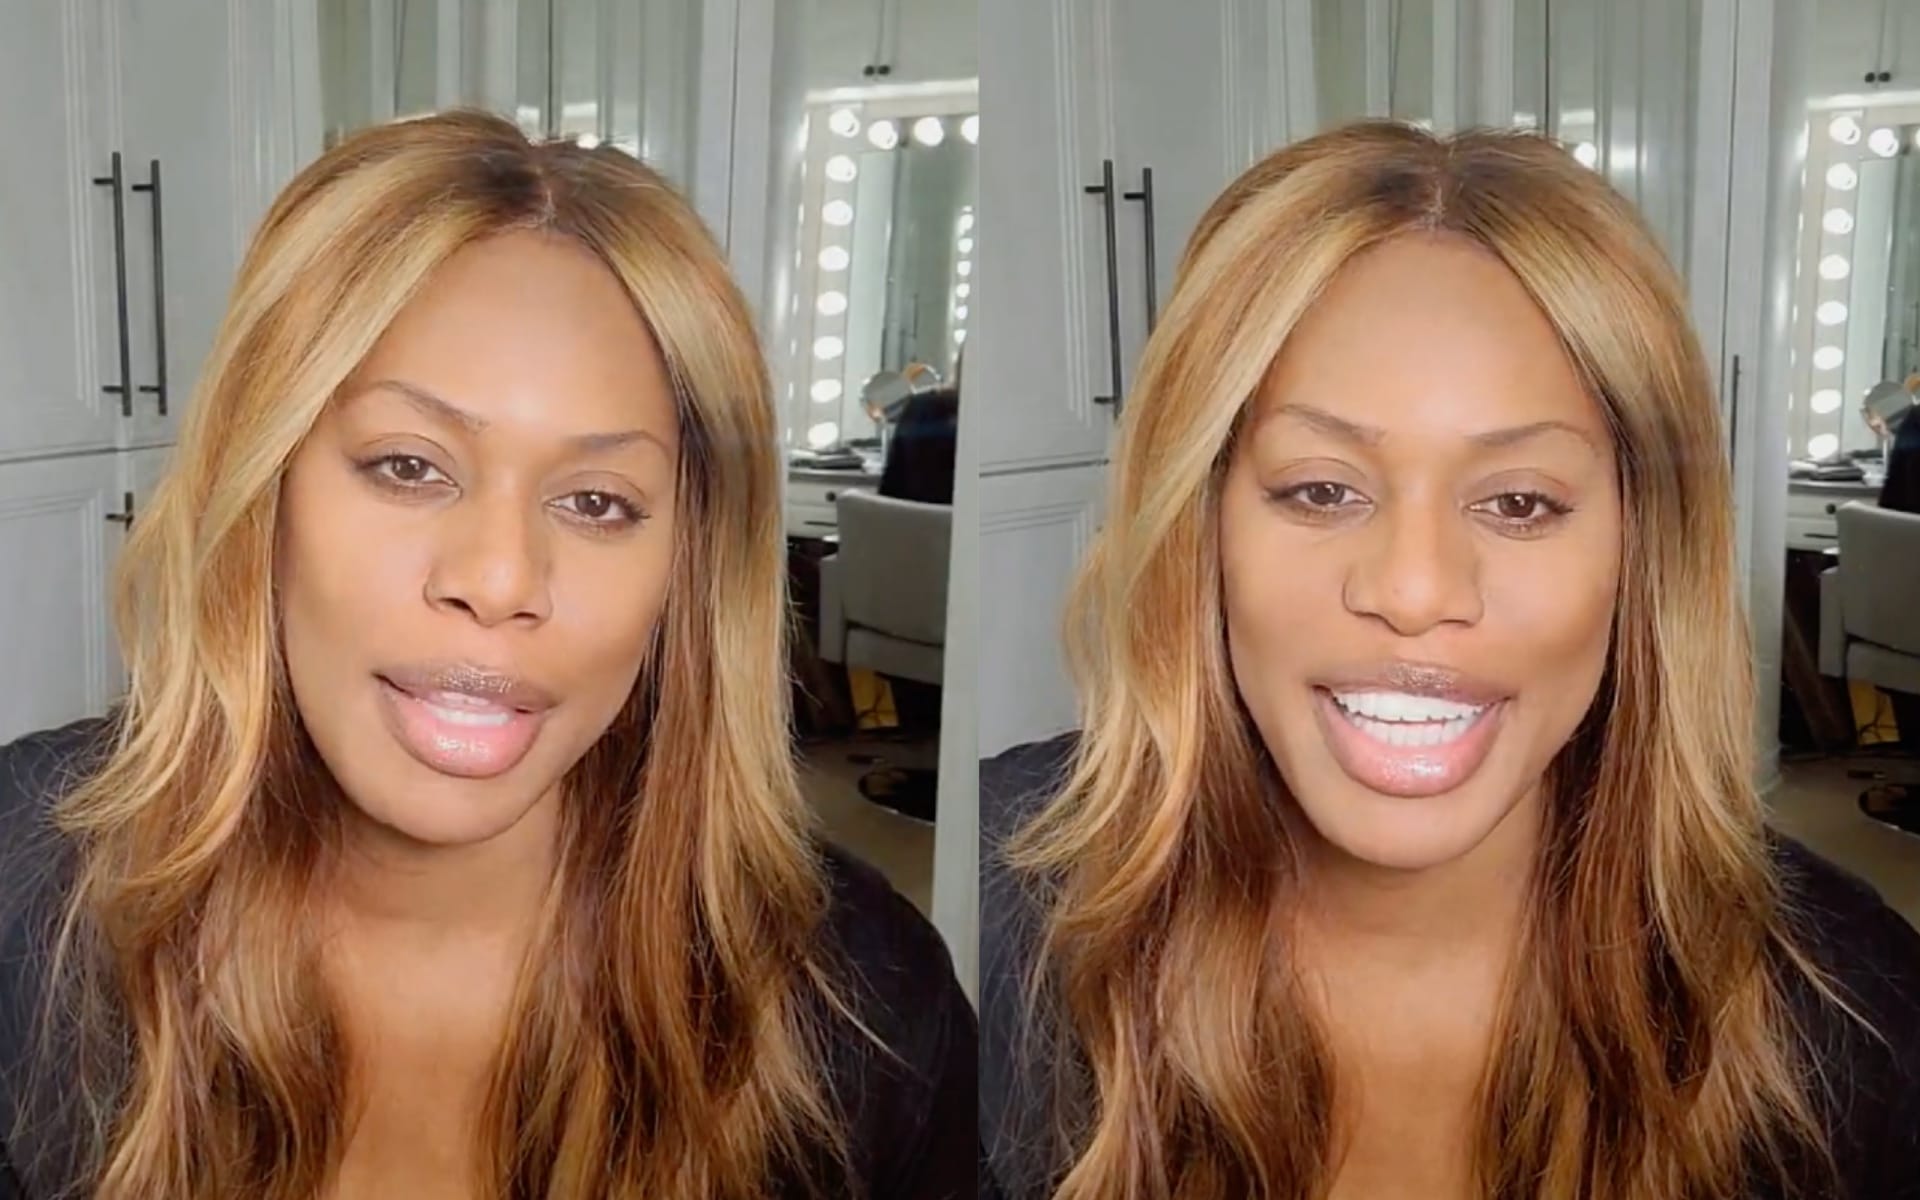 Laverne Cox Just Spoke Out About Her Natural Hair in the Best Way